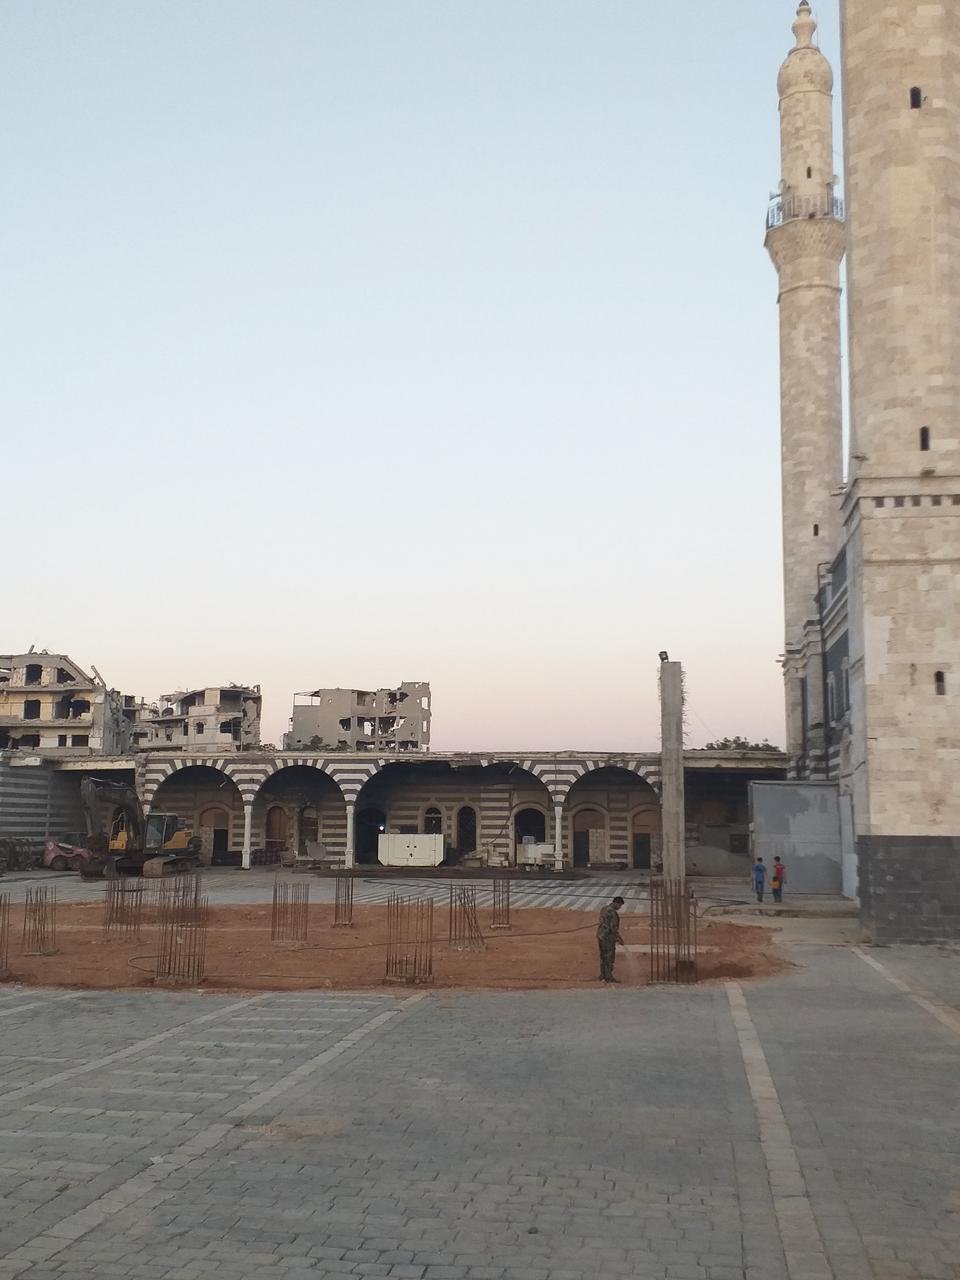 The Mosque Square, which was the starting point for the largest demonstrations in Homs.